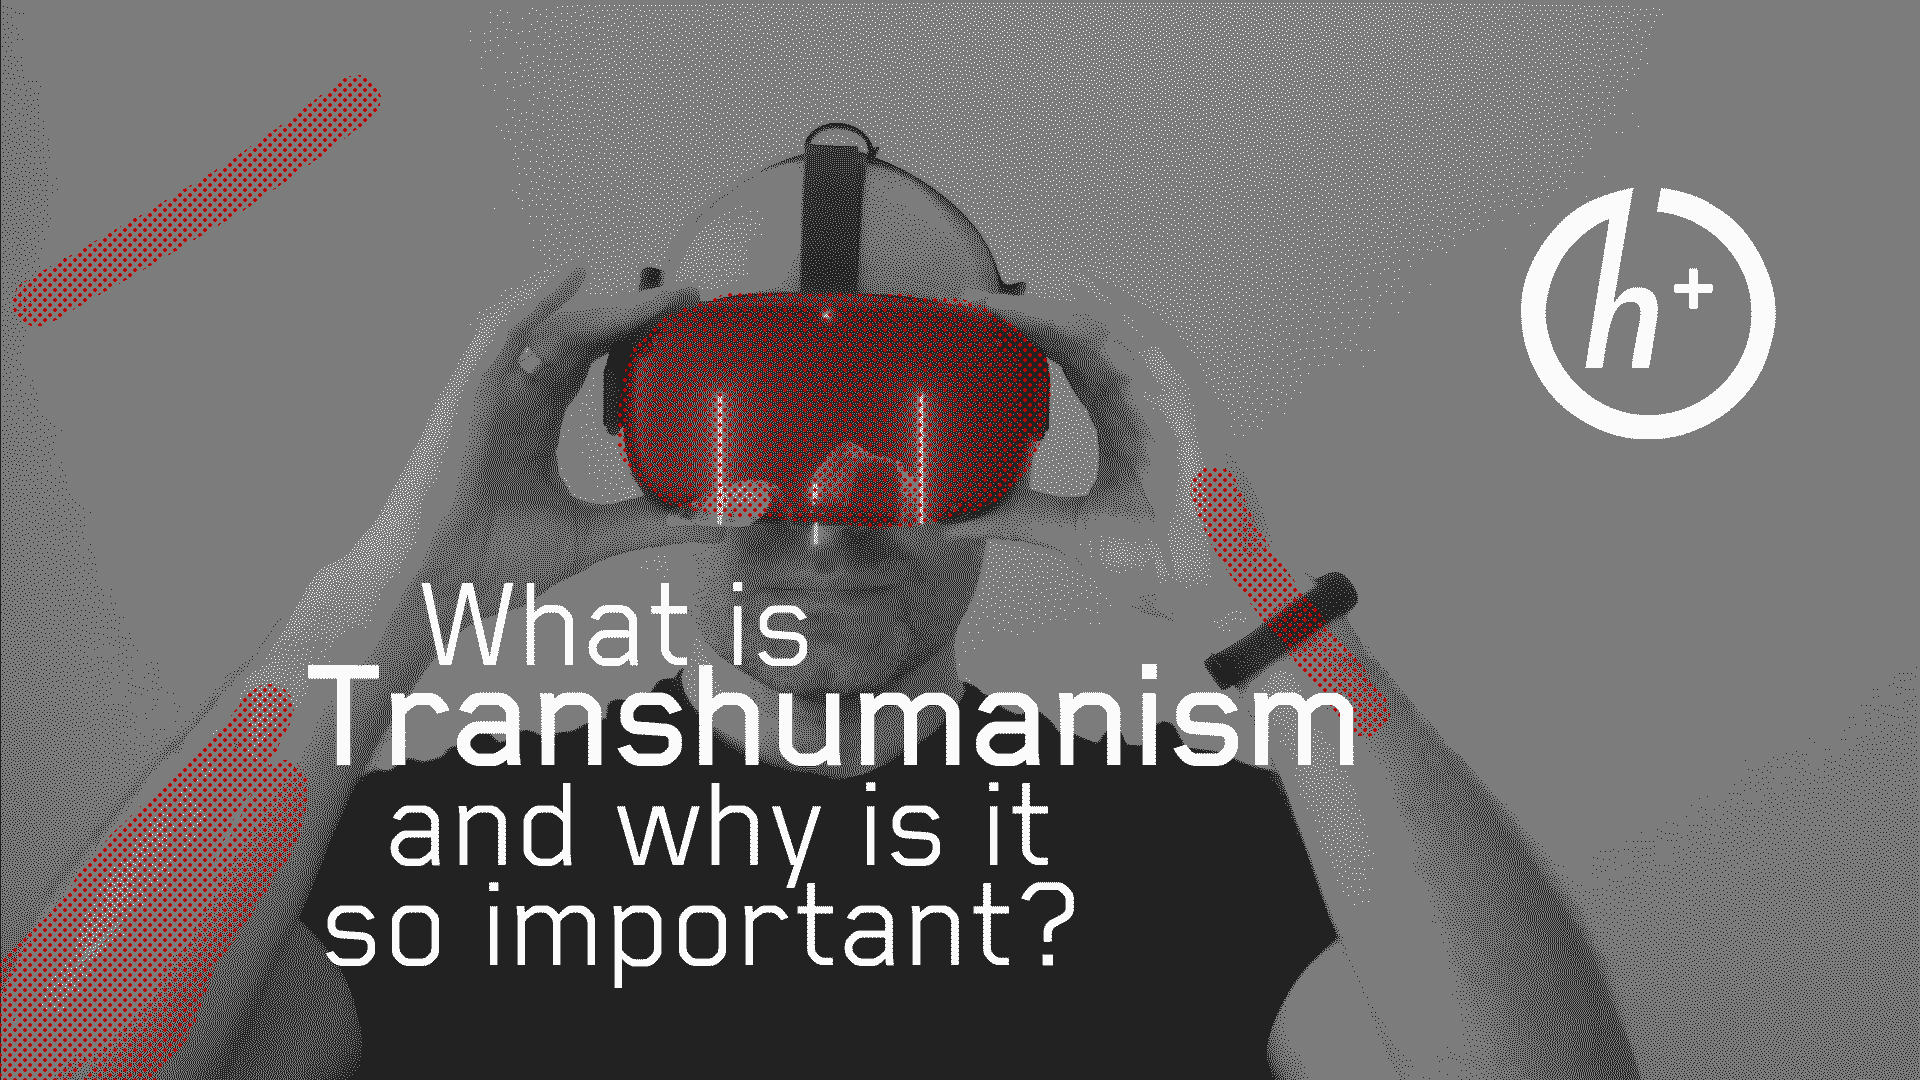 What is transhumanism and why is it so important to me